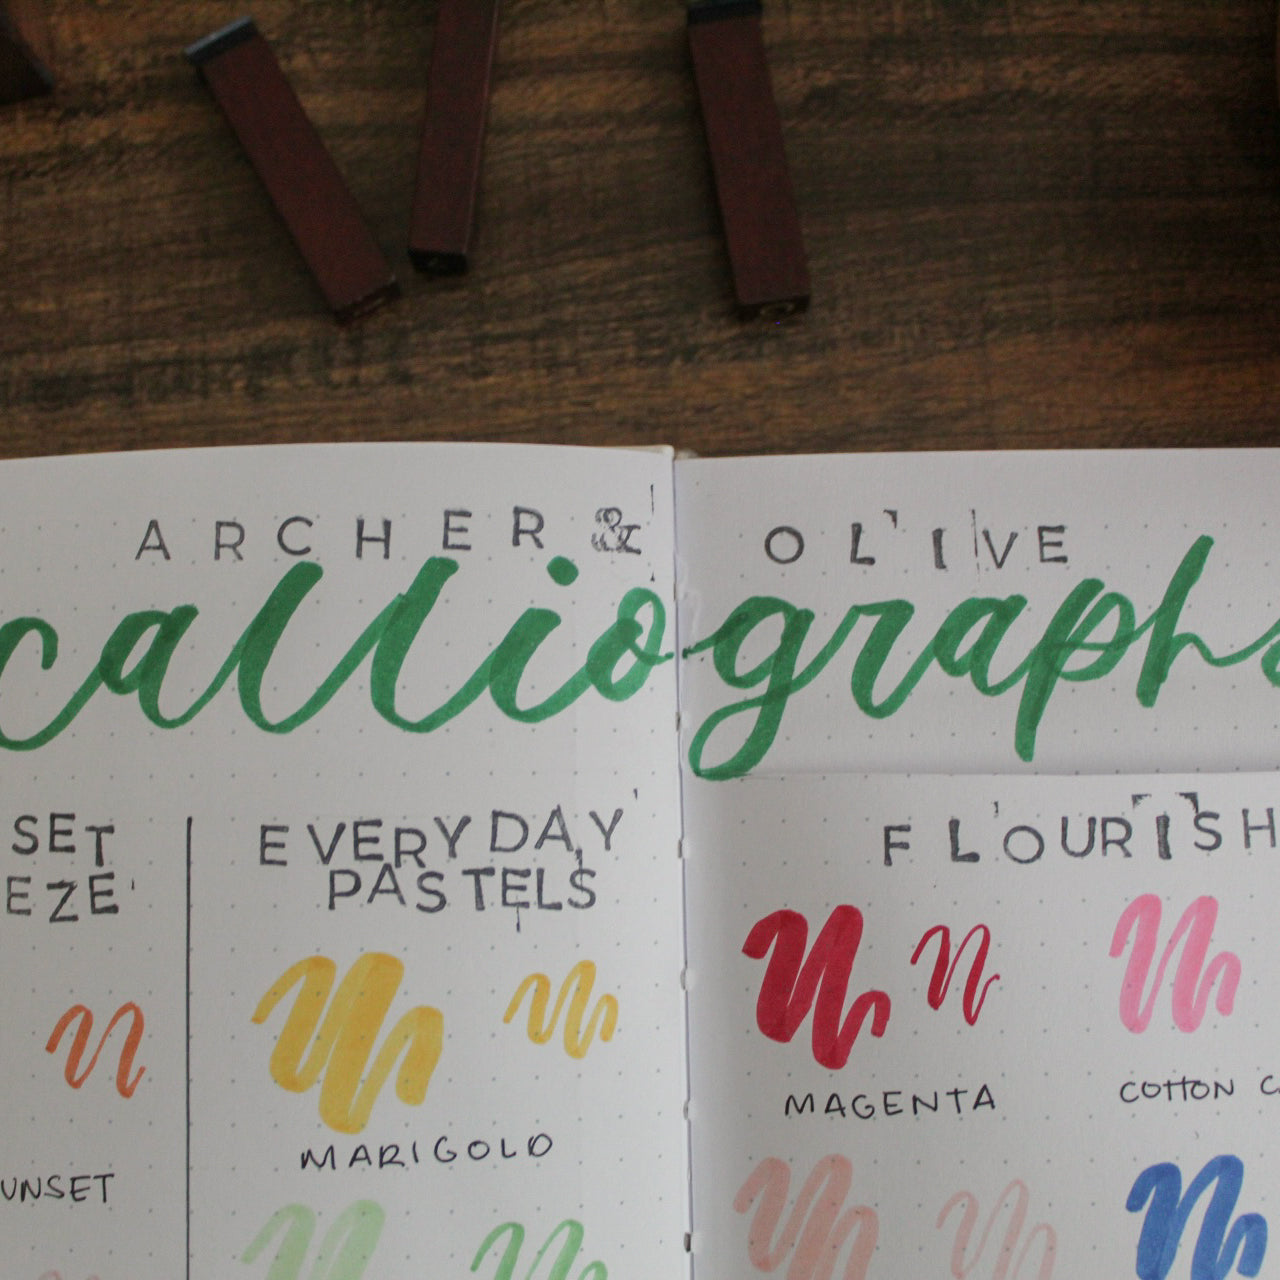 The words Archer and Olive are stamped at the top of a journal page. The word "calliographs" is written in calliography below it.